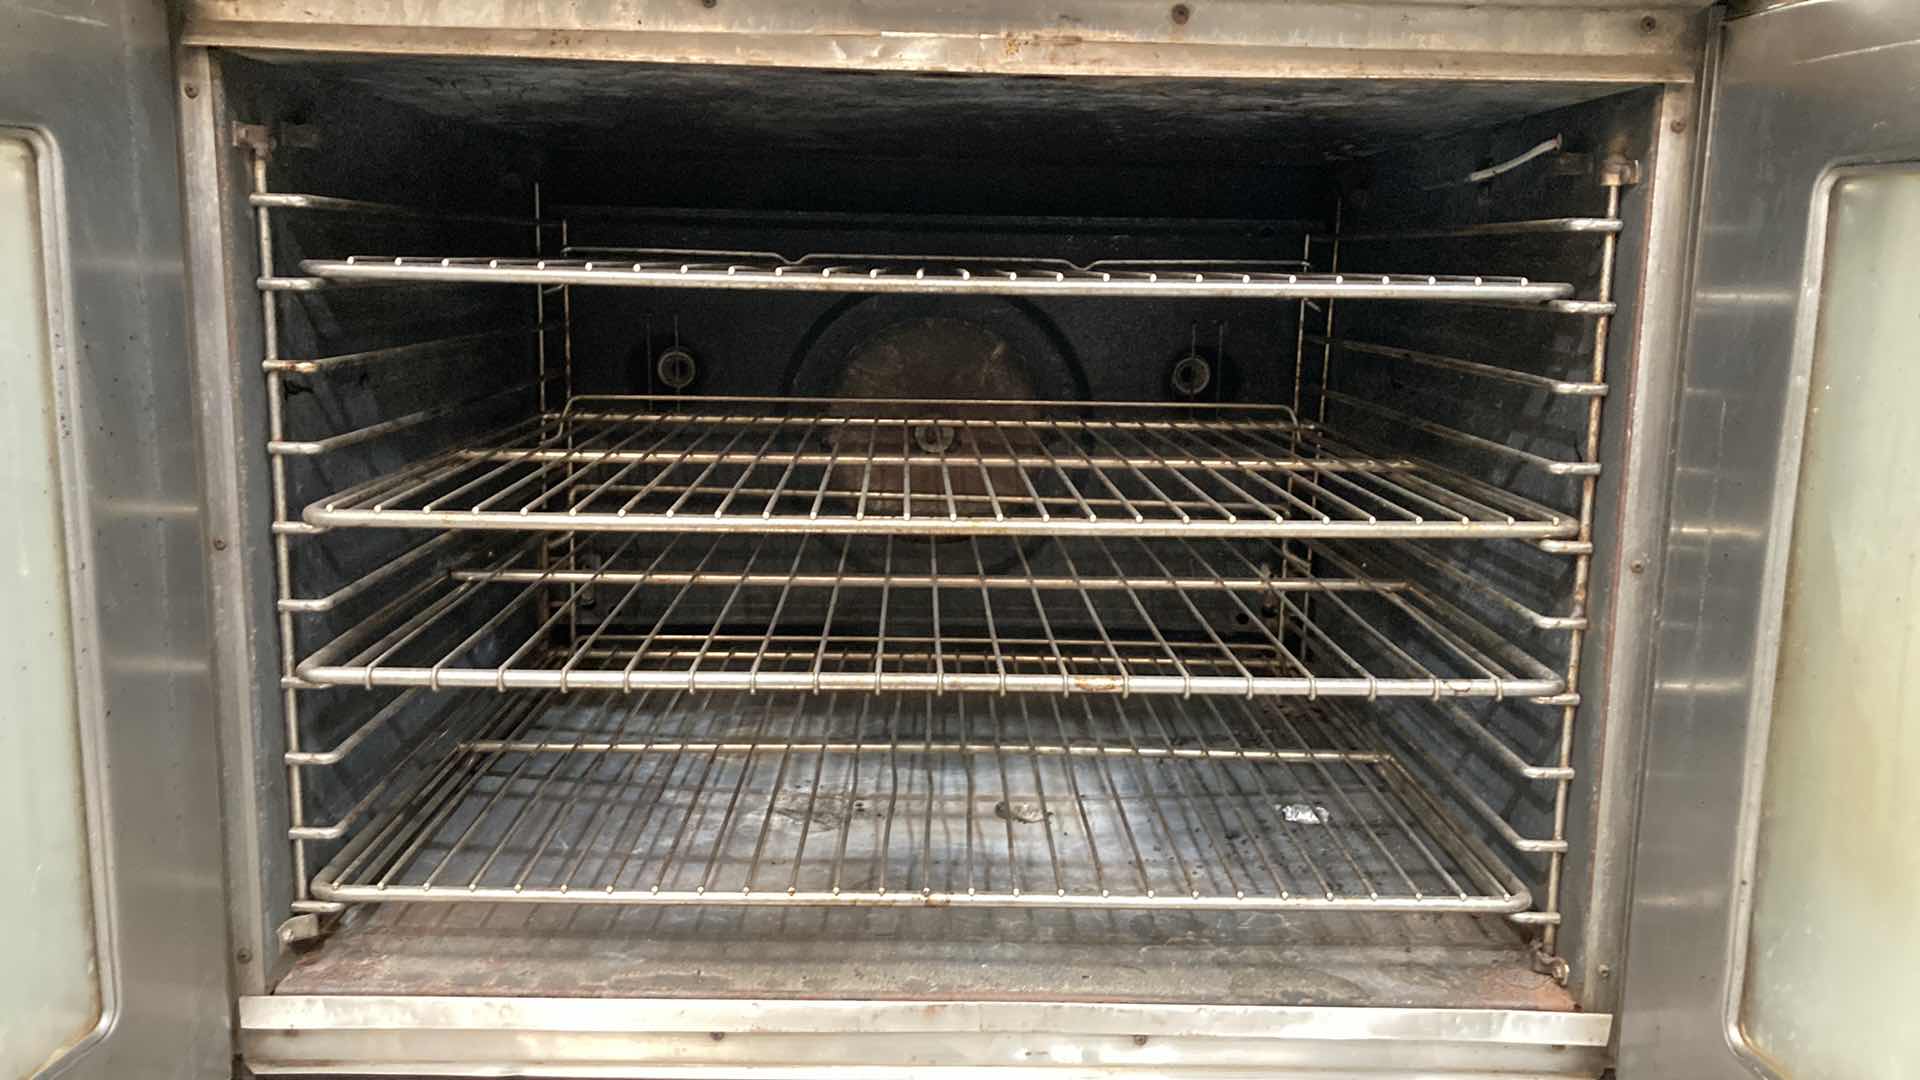 Photo 8 of BLODGETT 2 TIER COMMERCIAL CONVECTION OVEN (ELECTRICAL SHORT)